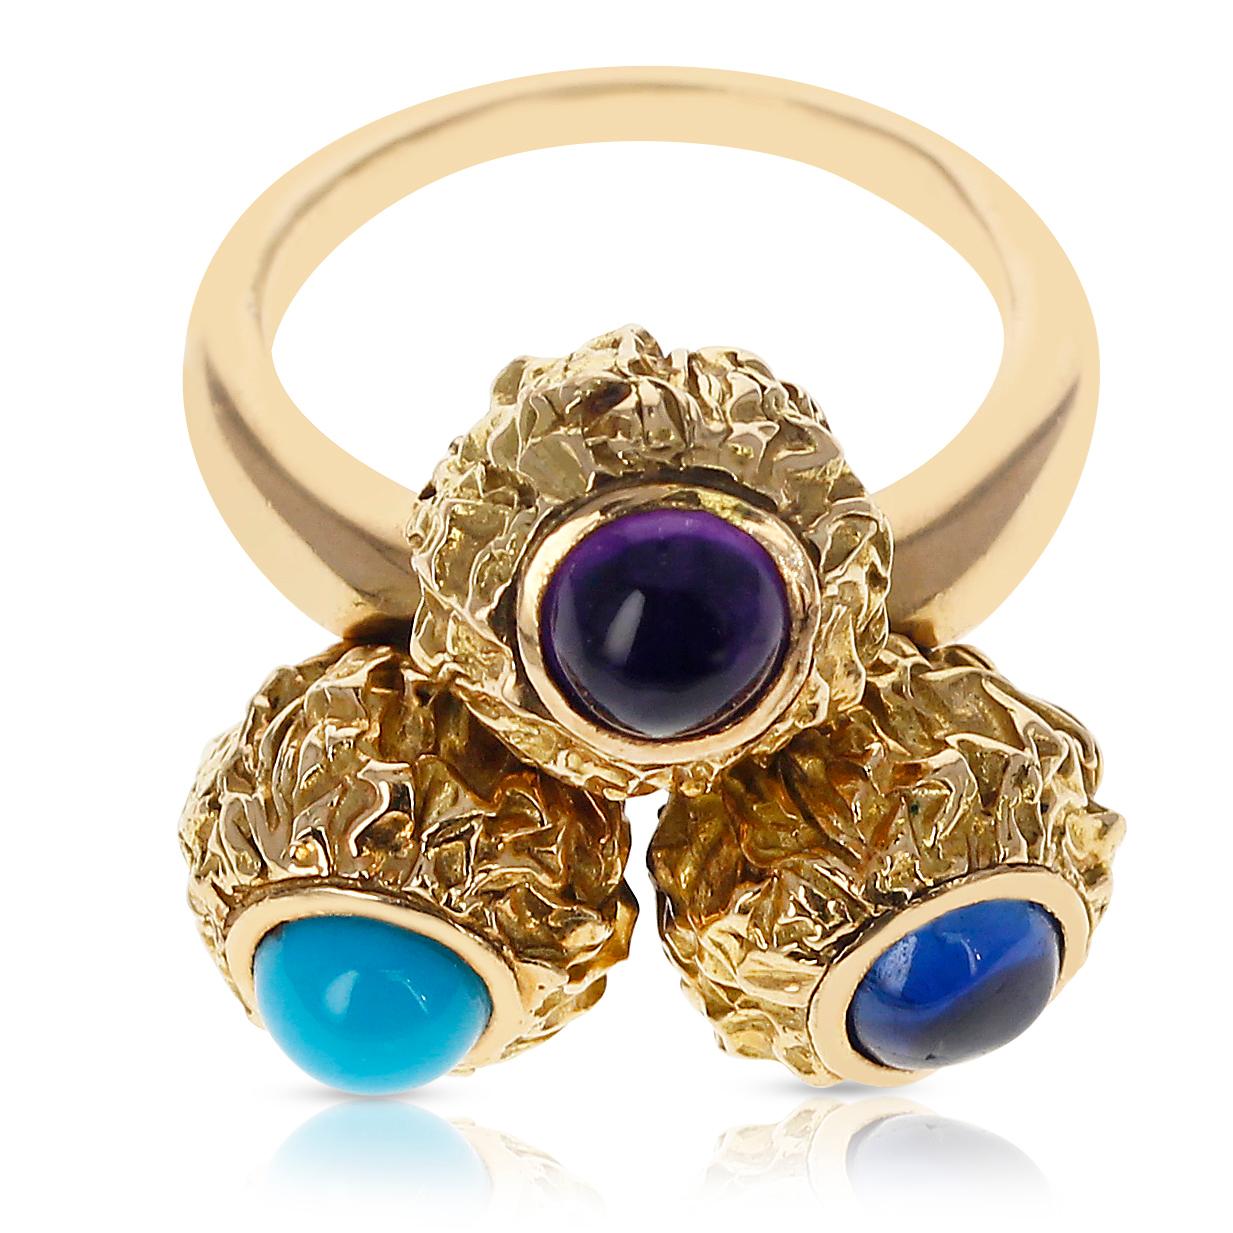 A beautiful Cartier Turquoise, Amethyst, Sapphire Cabochon Trio Ring made in 18 Karat Yellow Gold. The gold is textured. Total Weight: 12.39 grams. Ring Size: 5.25